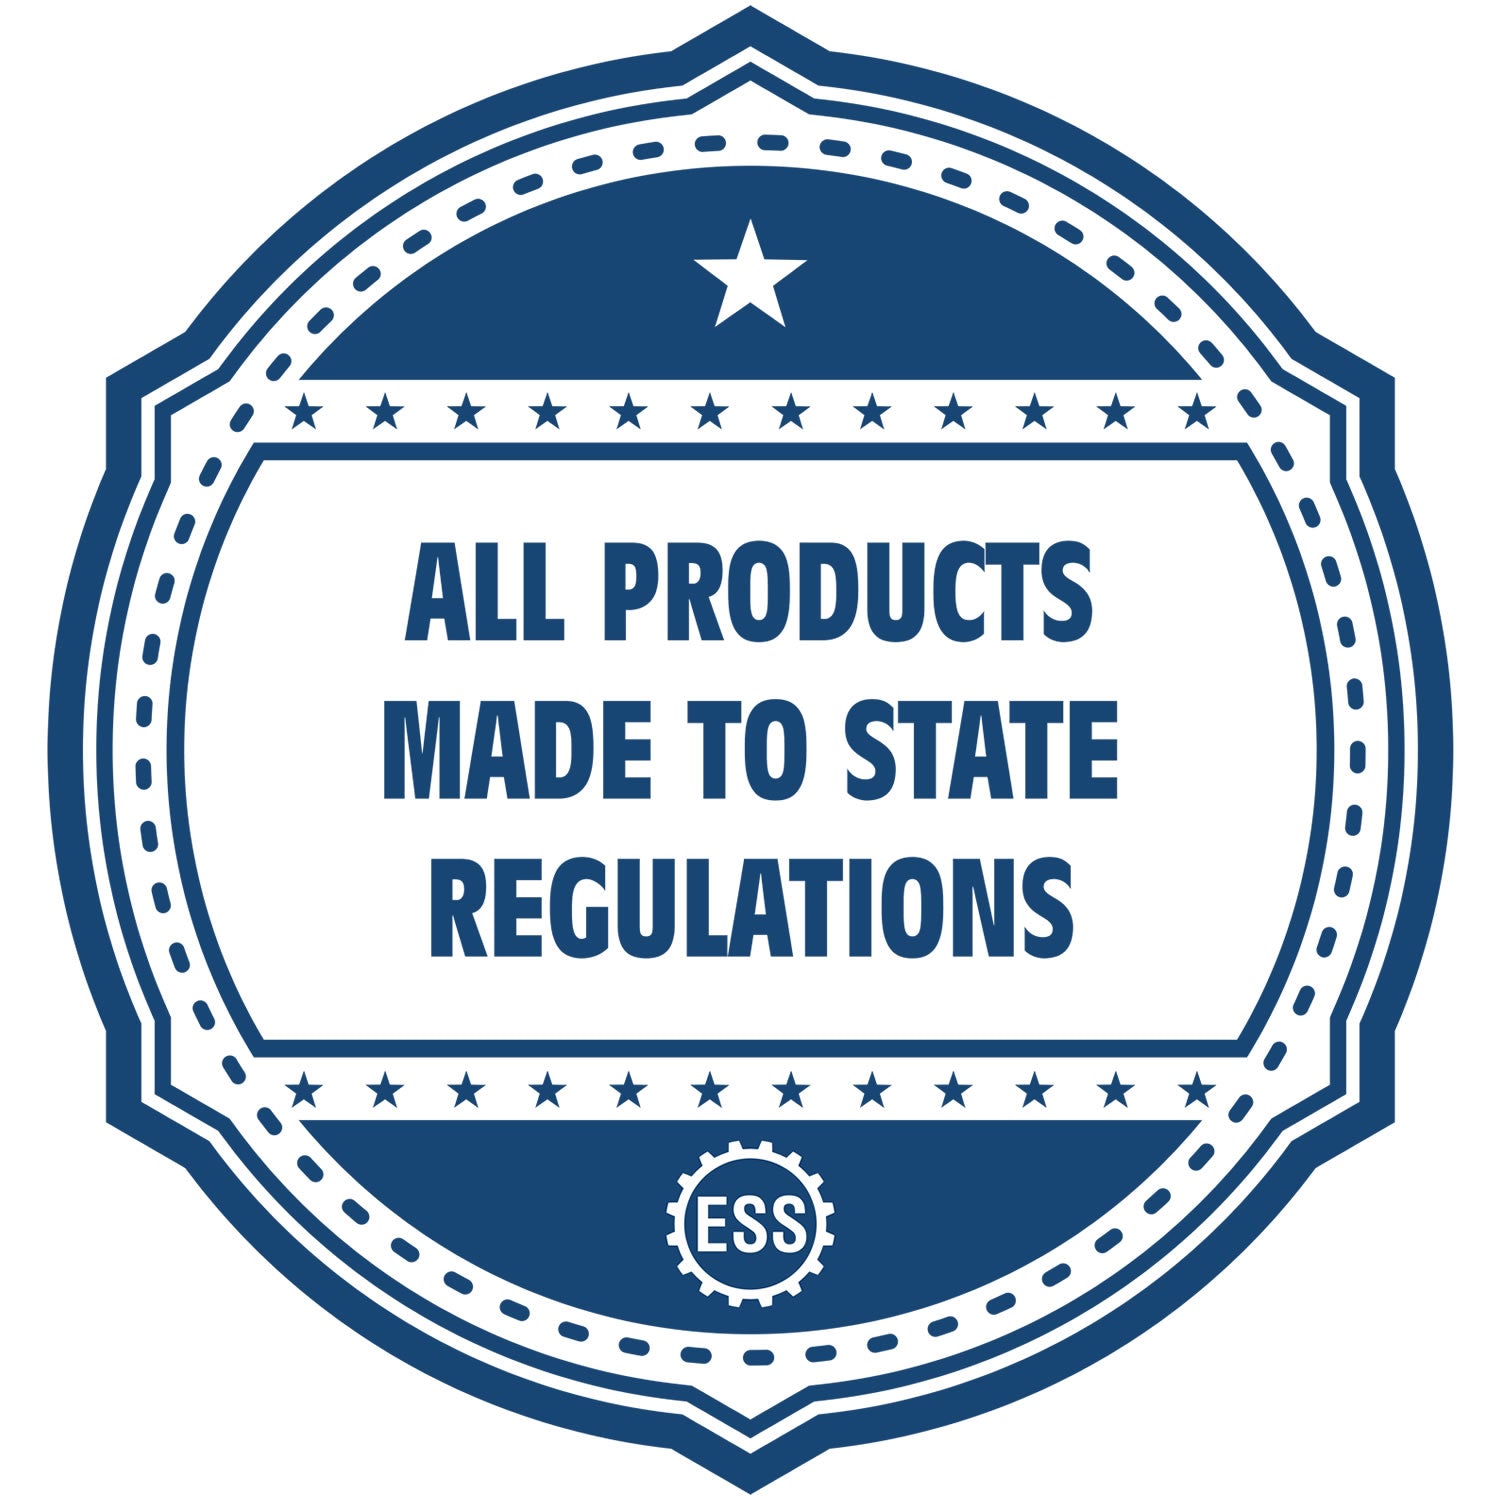 An icon or badge element for the Soft Wisconsin Professional Engineer Seal showing that this product is made in compliance with state regulations.